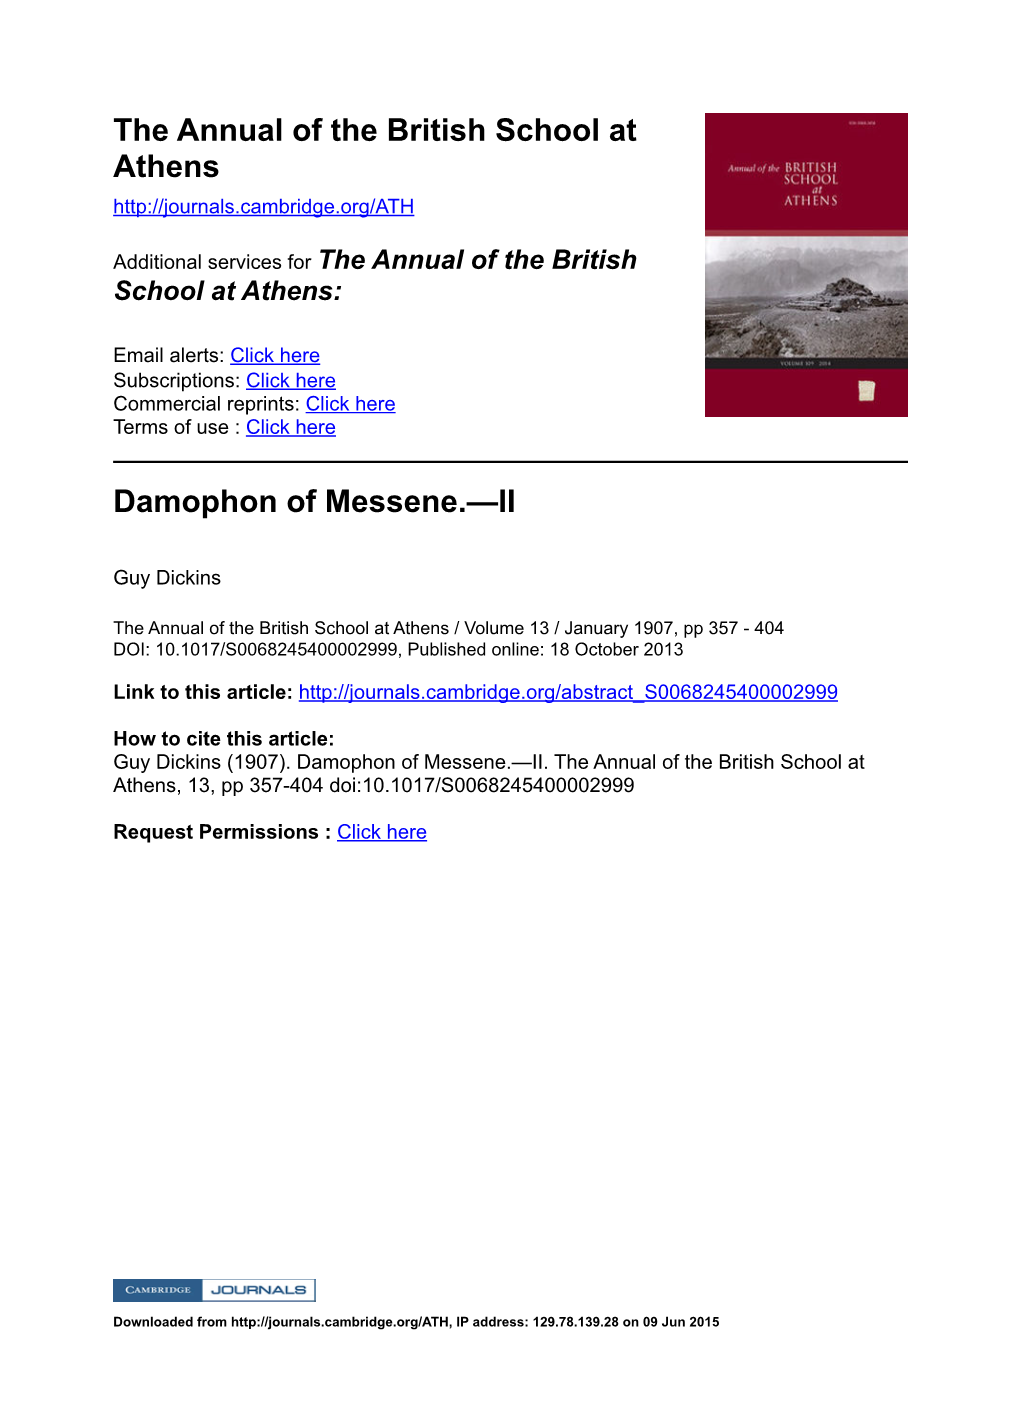 The Annual of the British School at Athens Damophon of Messene.—II